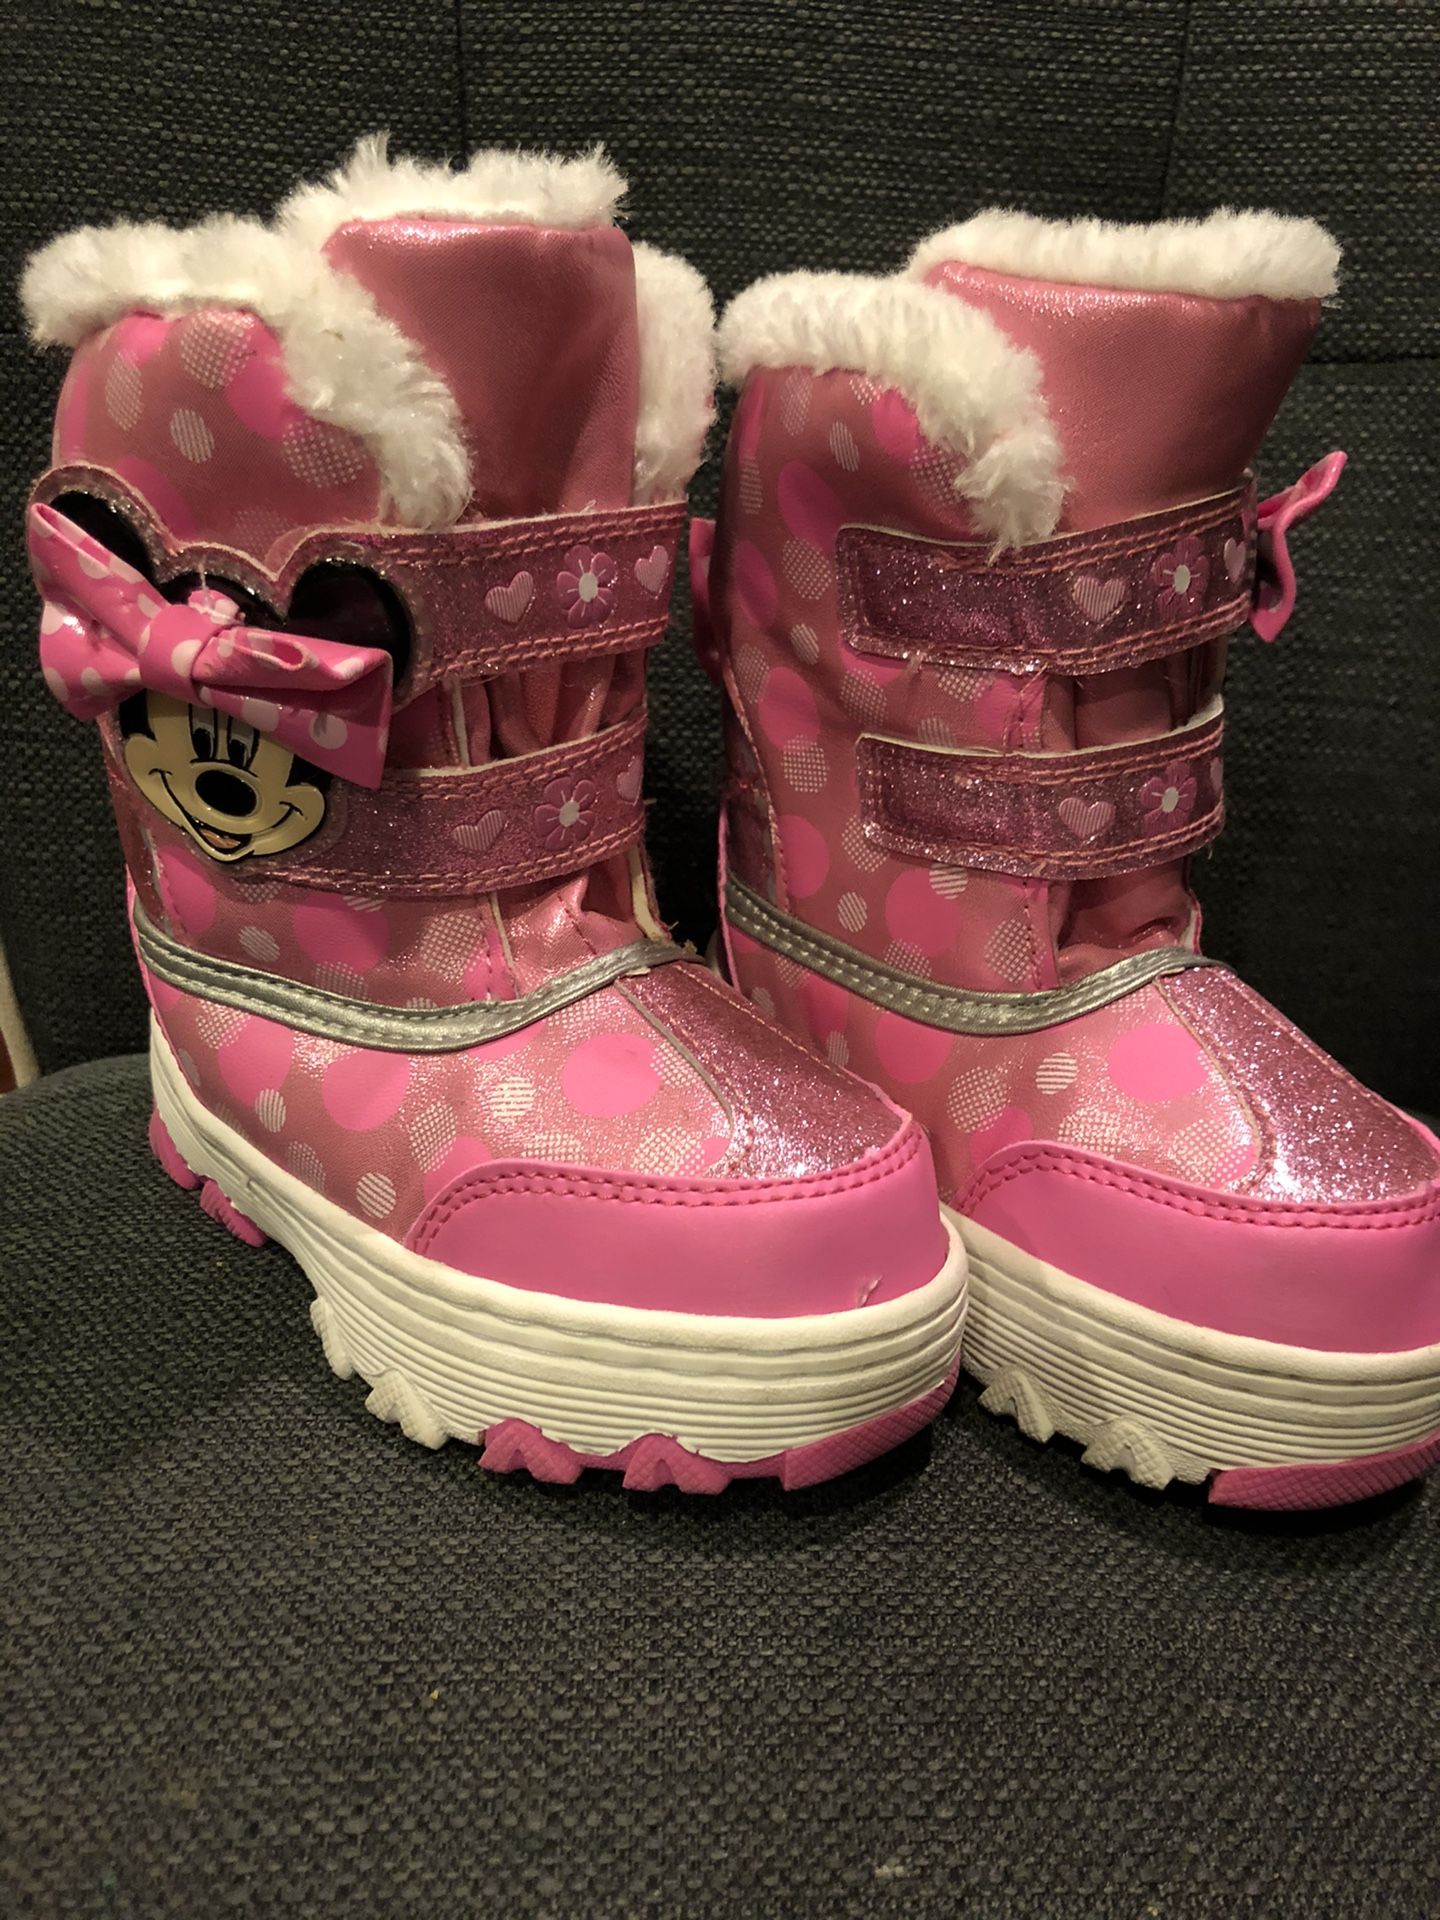 Disney Minnie Mouse Snow Boots Toddler Size 8